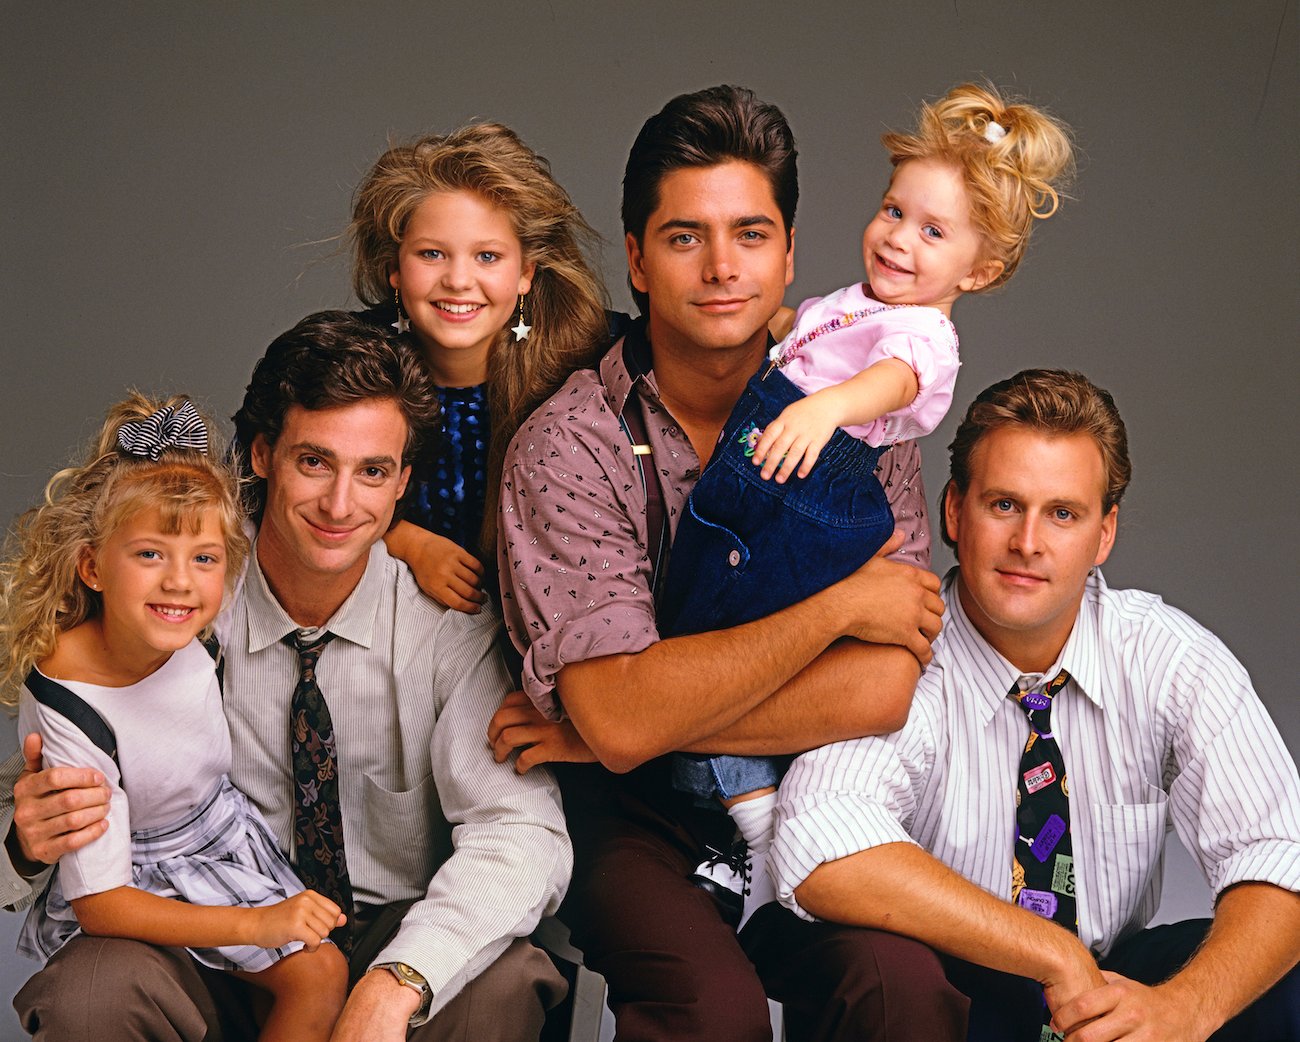 Cast of 'Full House' (l-r) Jodie Sweetin, Bob Saget, Candace Cameron, John Stamos, Mary Kate/Ashley Olsen, and Dave Coulier